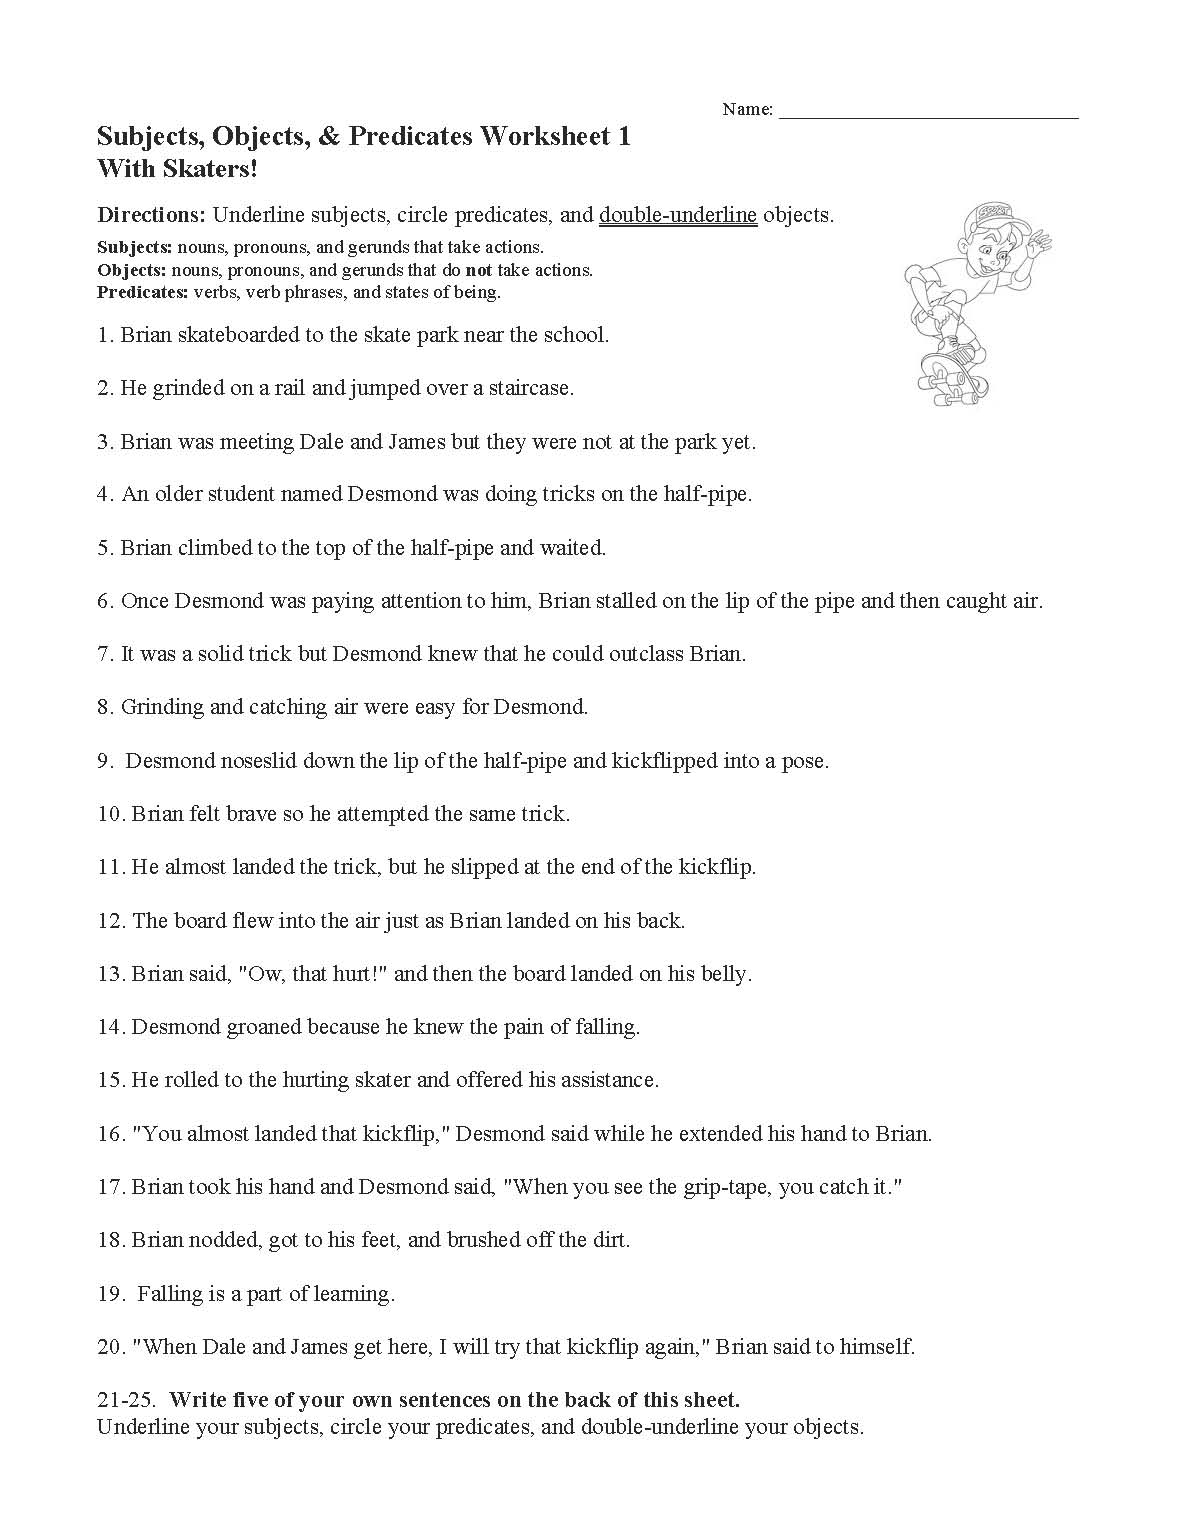 Subjects Objects And Predicates With Skaters Worksheet Sentence 